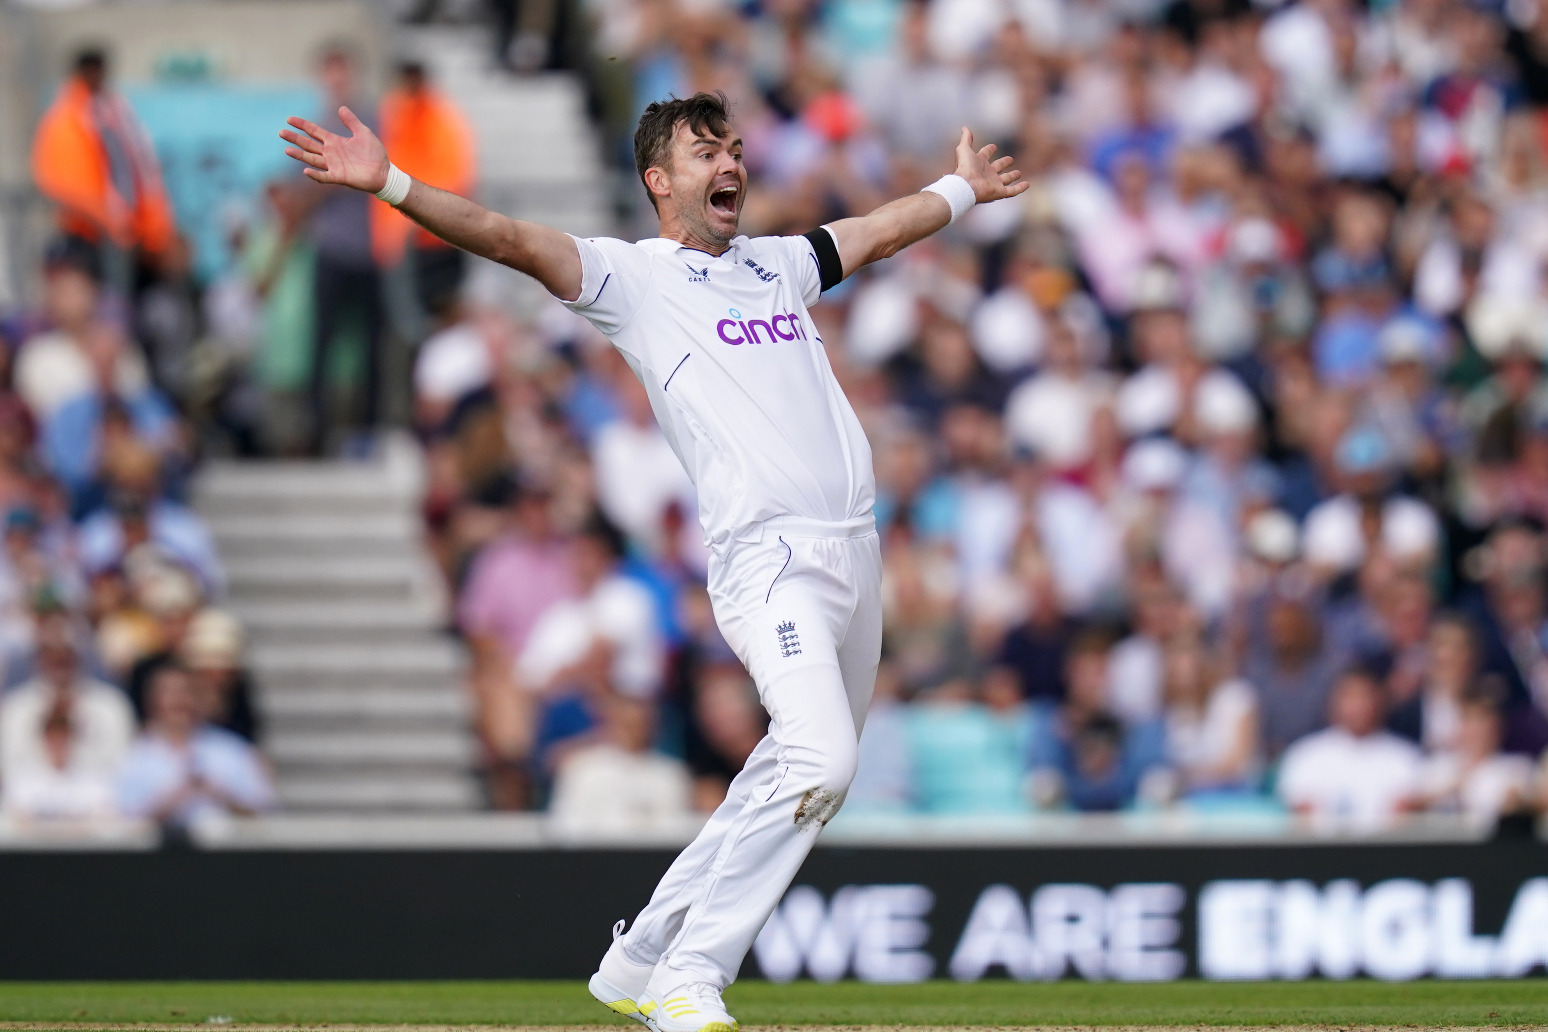 James Anderson to end England career